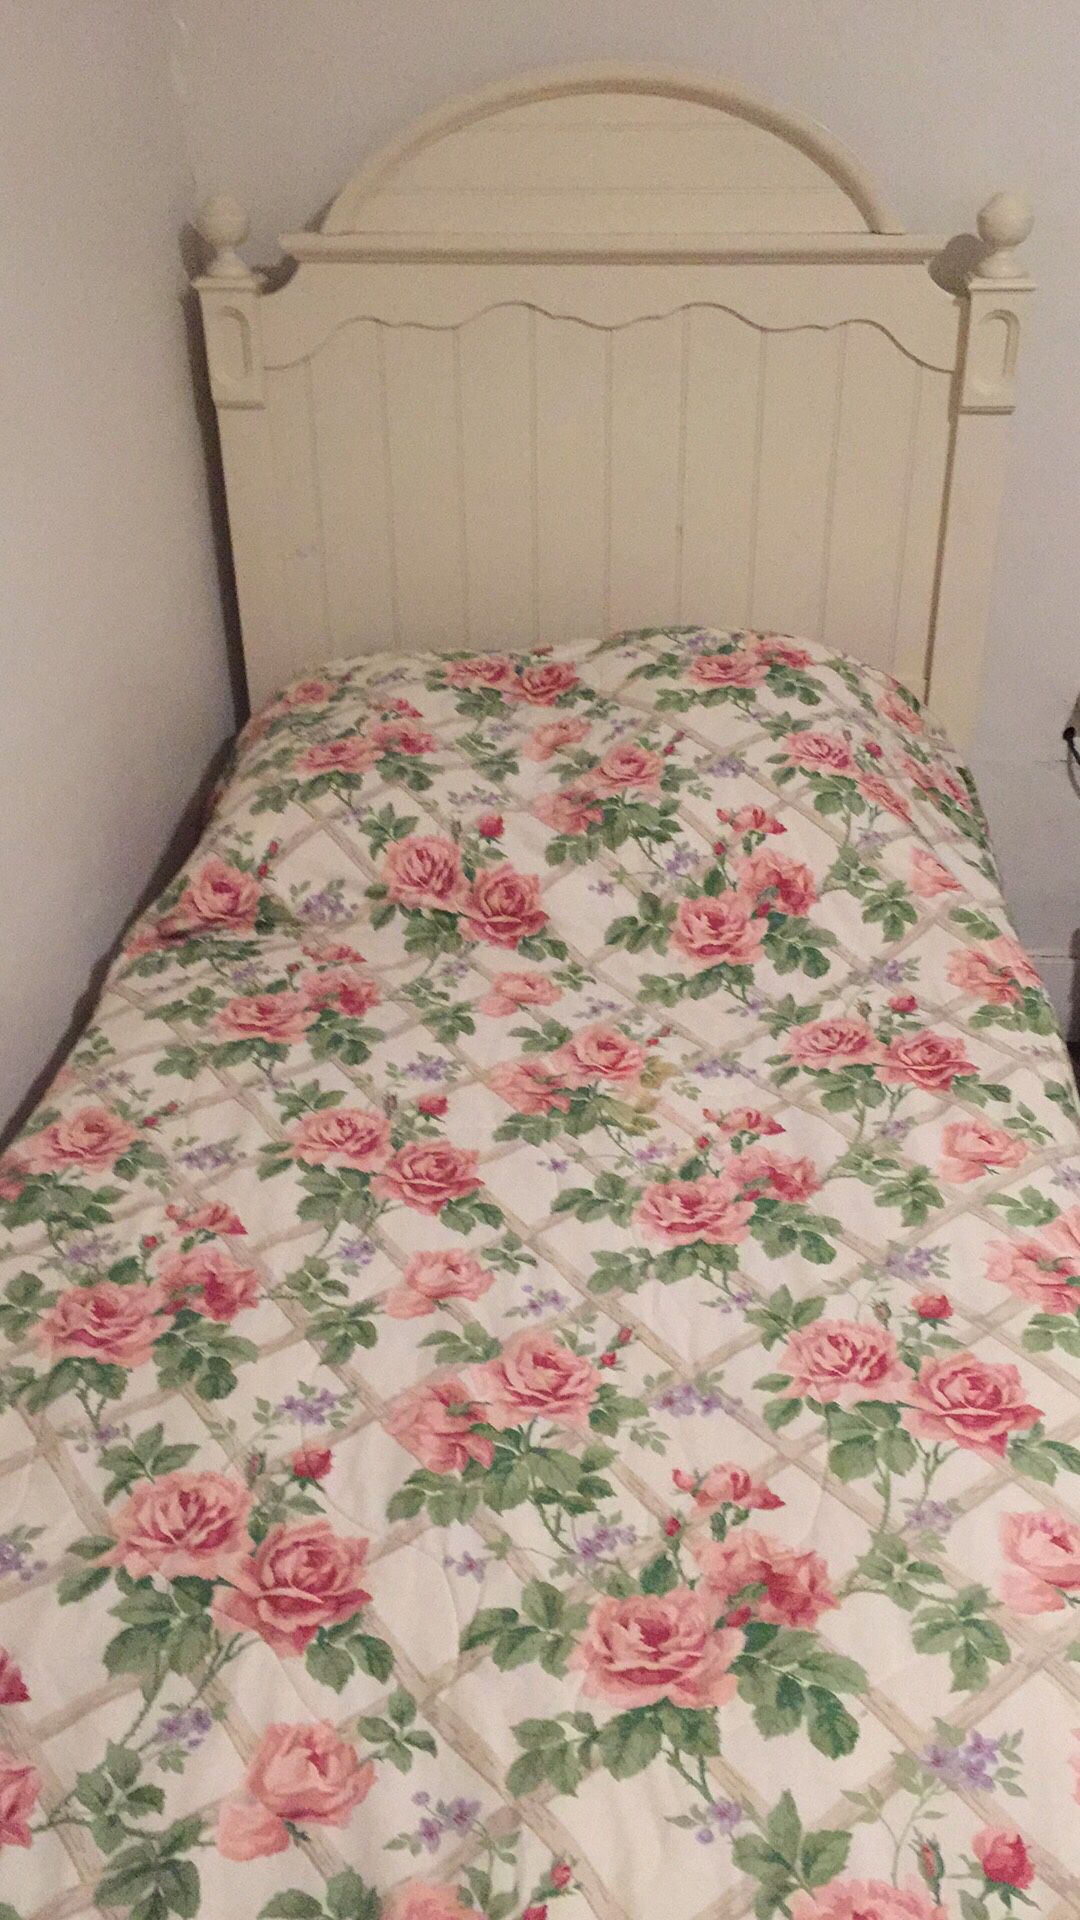 Adorable Twin Bed. $150 or best offer!!